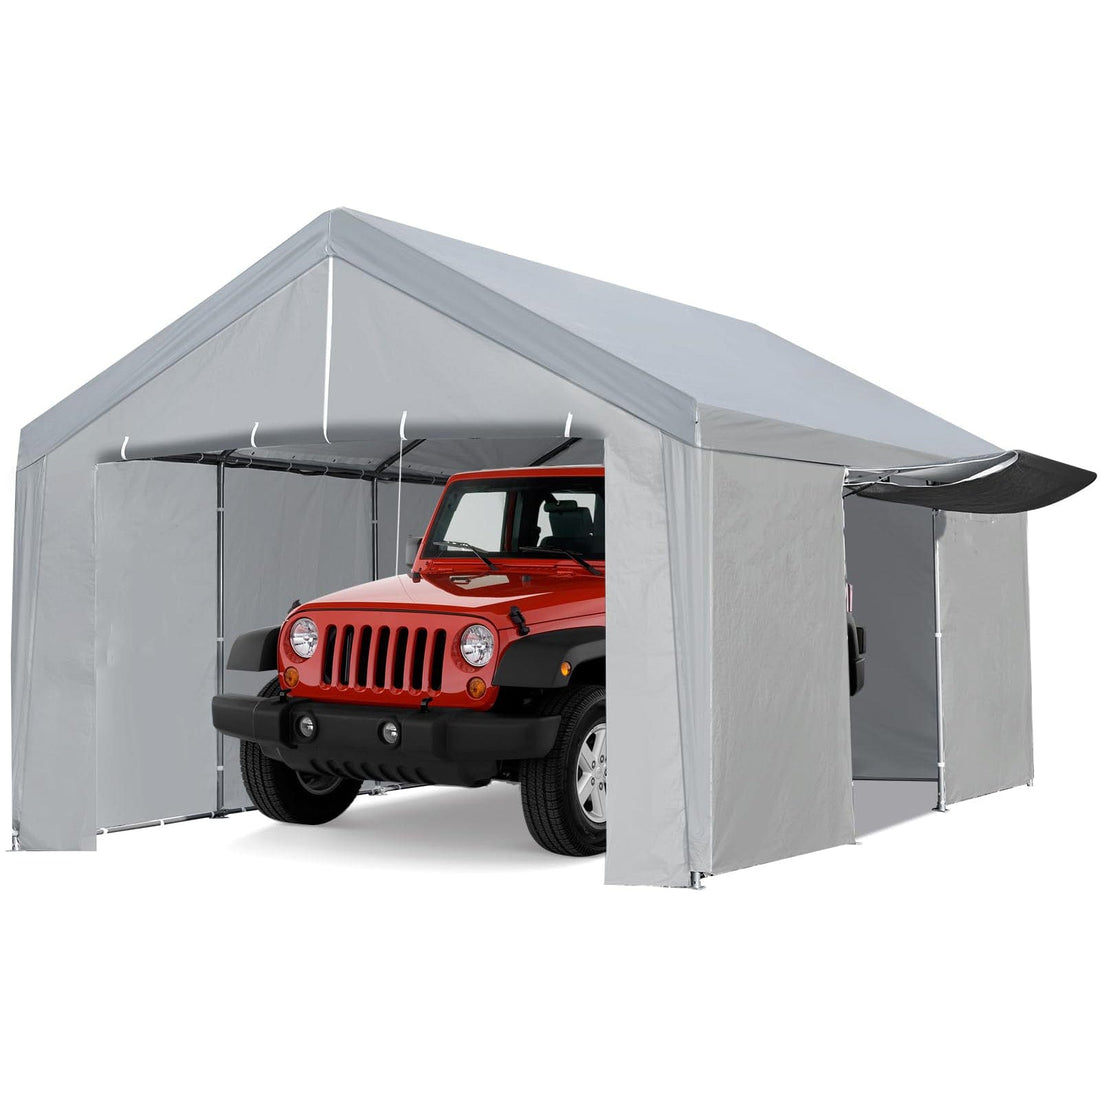 10x20 FT Heavy Duty Car Canopy & Party Tent,Portable Garage